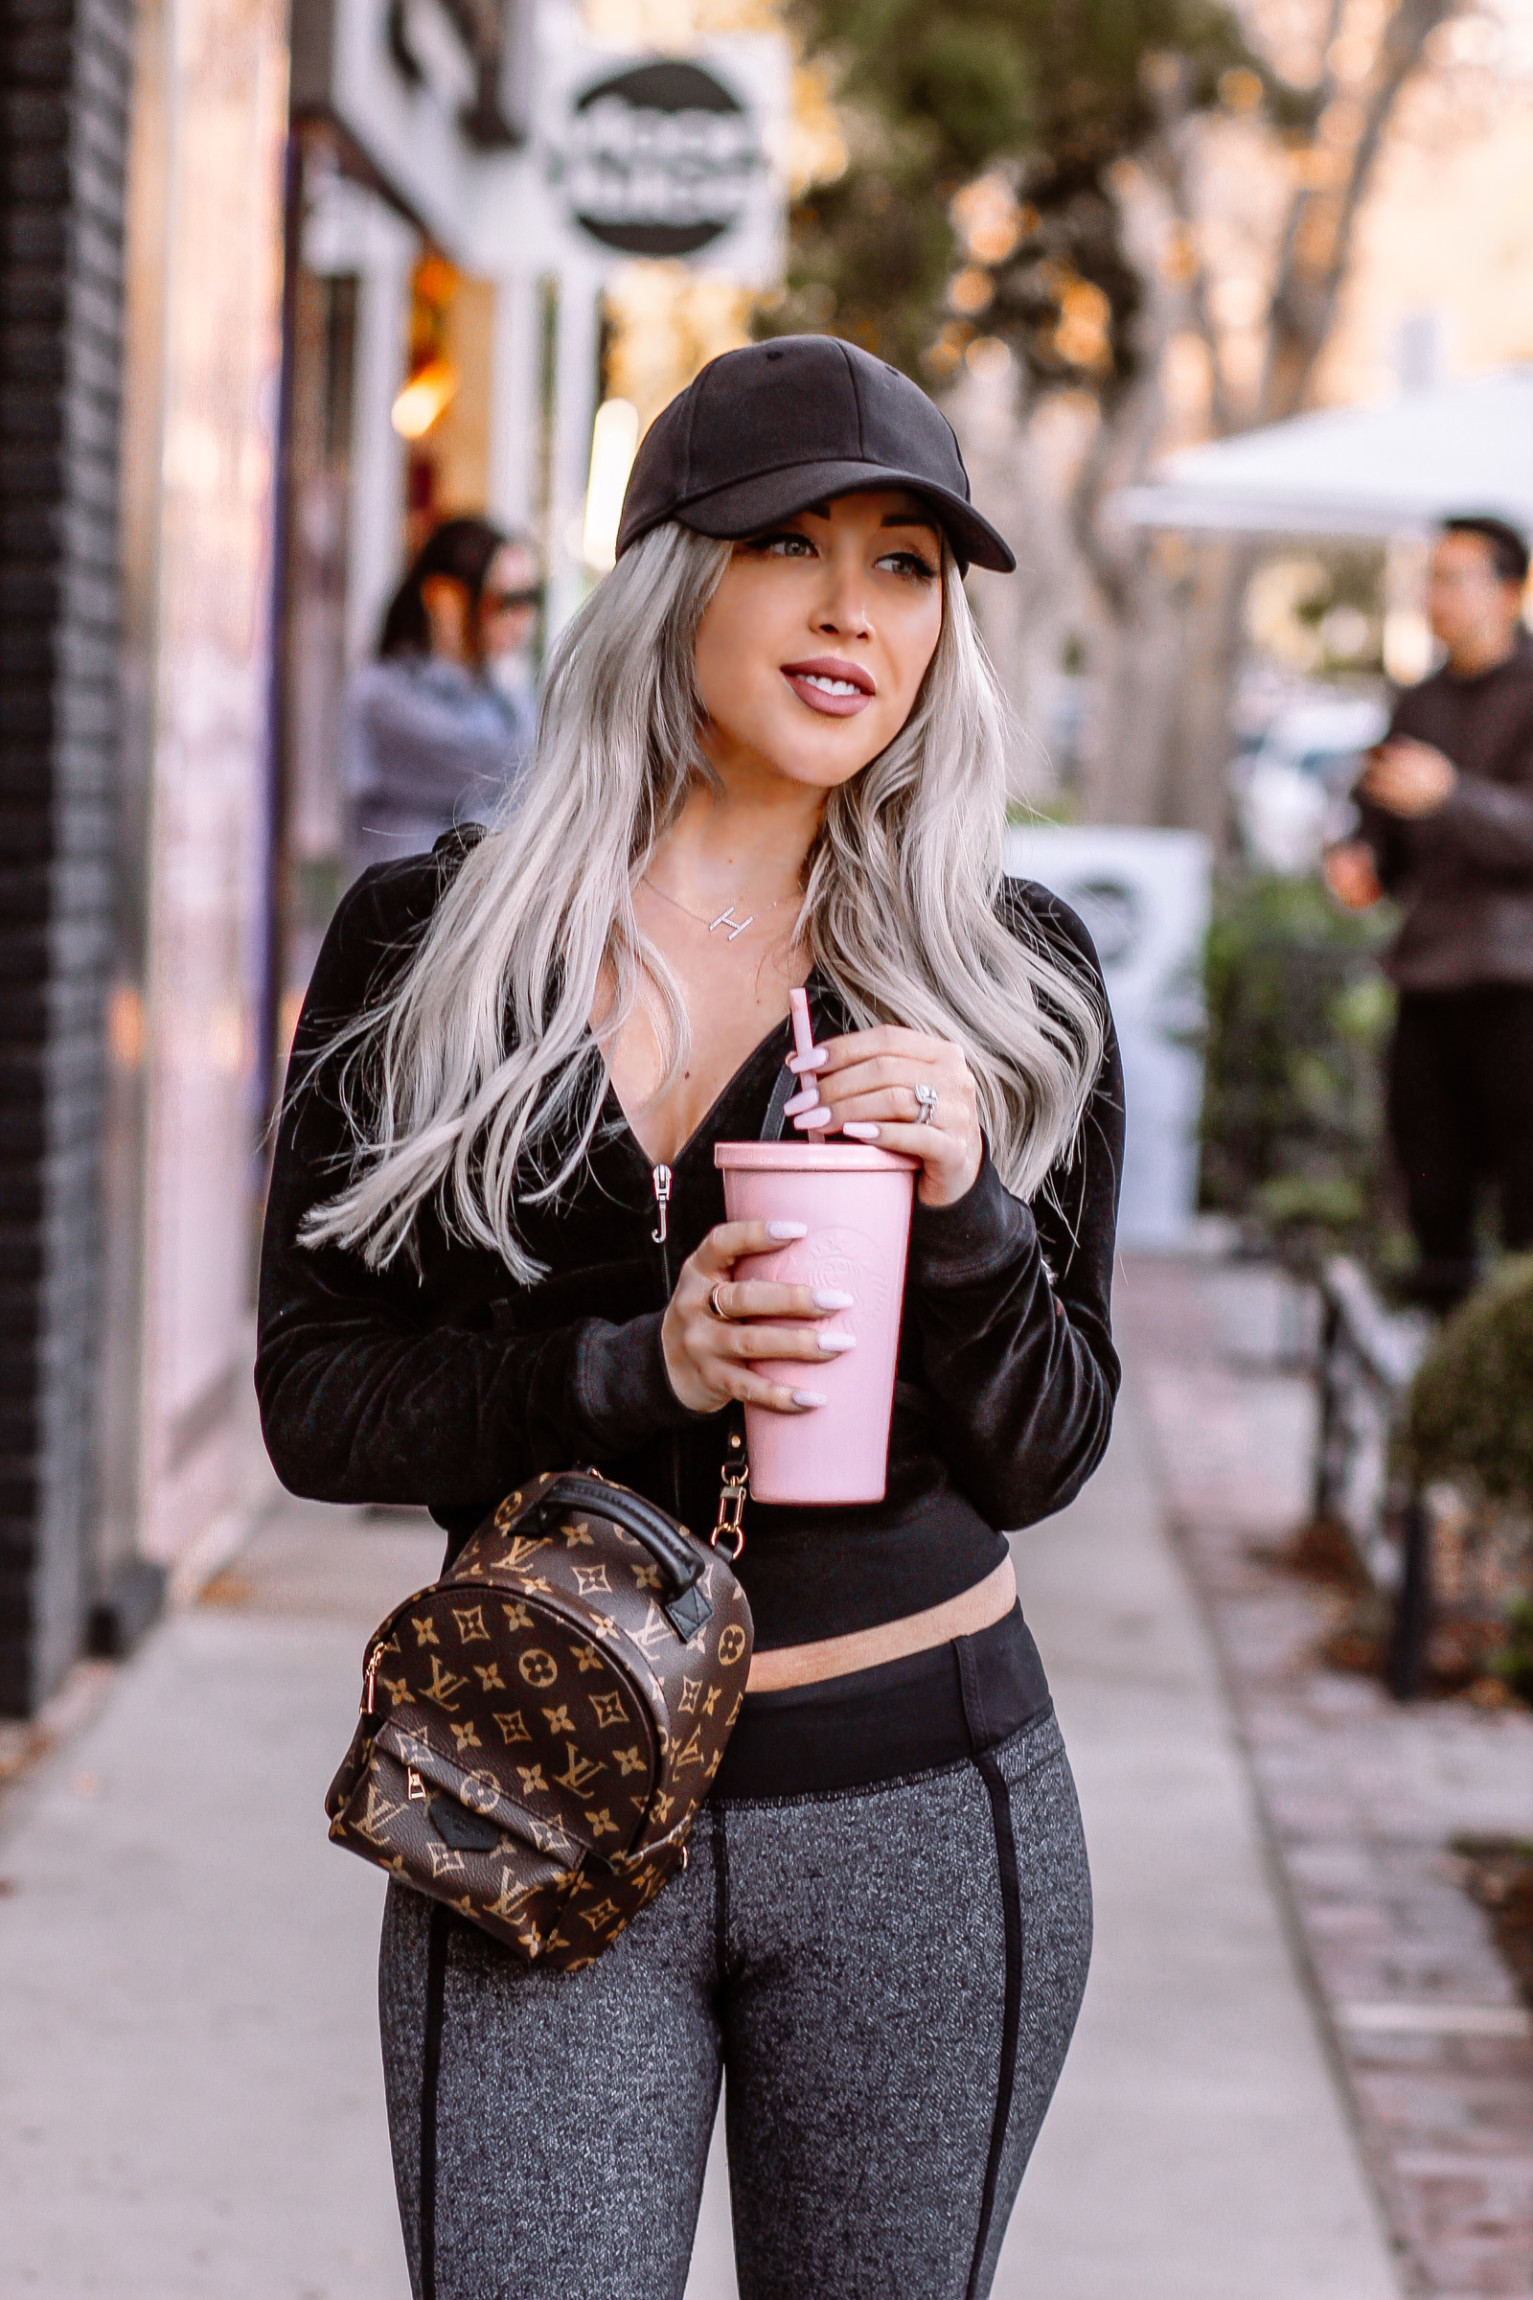 7 Reasons Why You Should Be Drinking More Water | Pink Starbucks Tumbler | Louis Vuitton Backpack | Blondie in the City by Hayley Larue